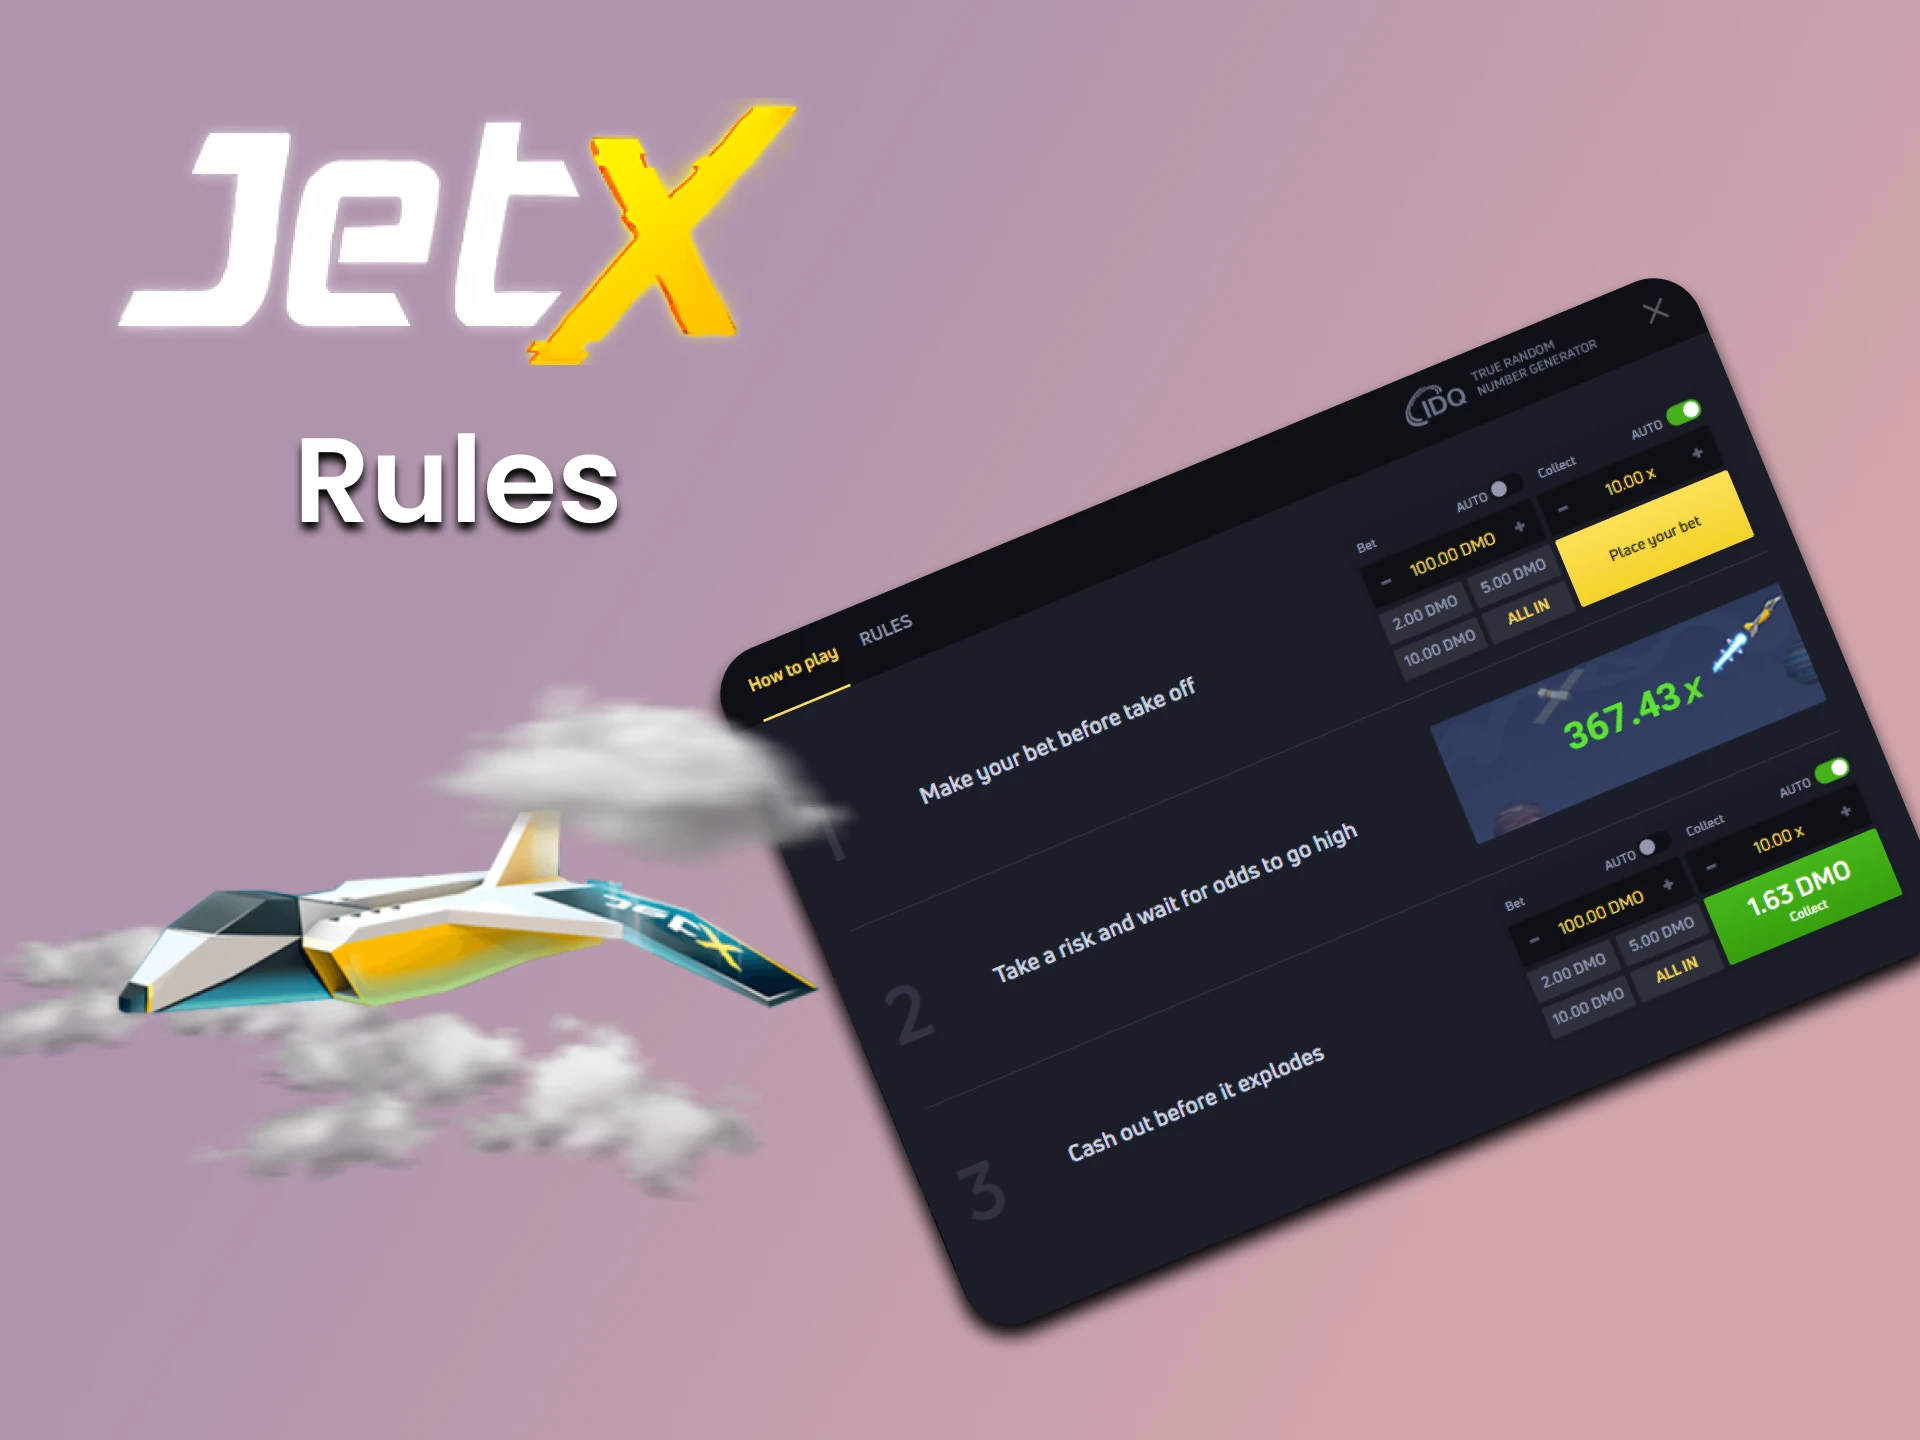 Learn the rules of JetX games.